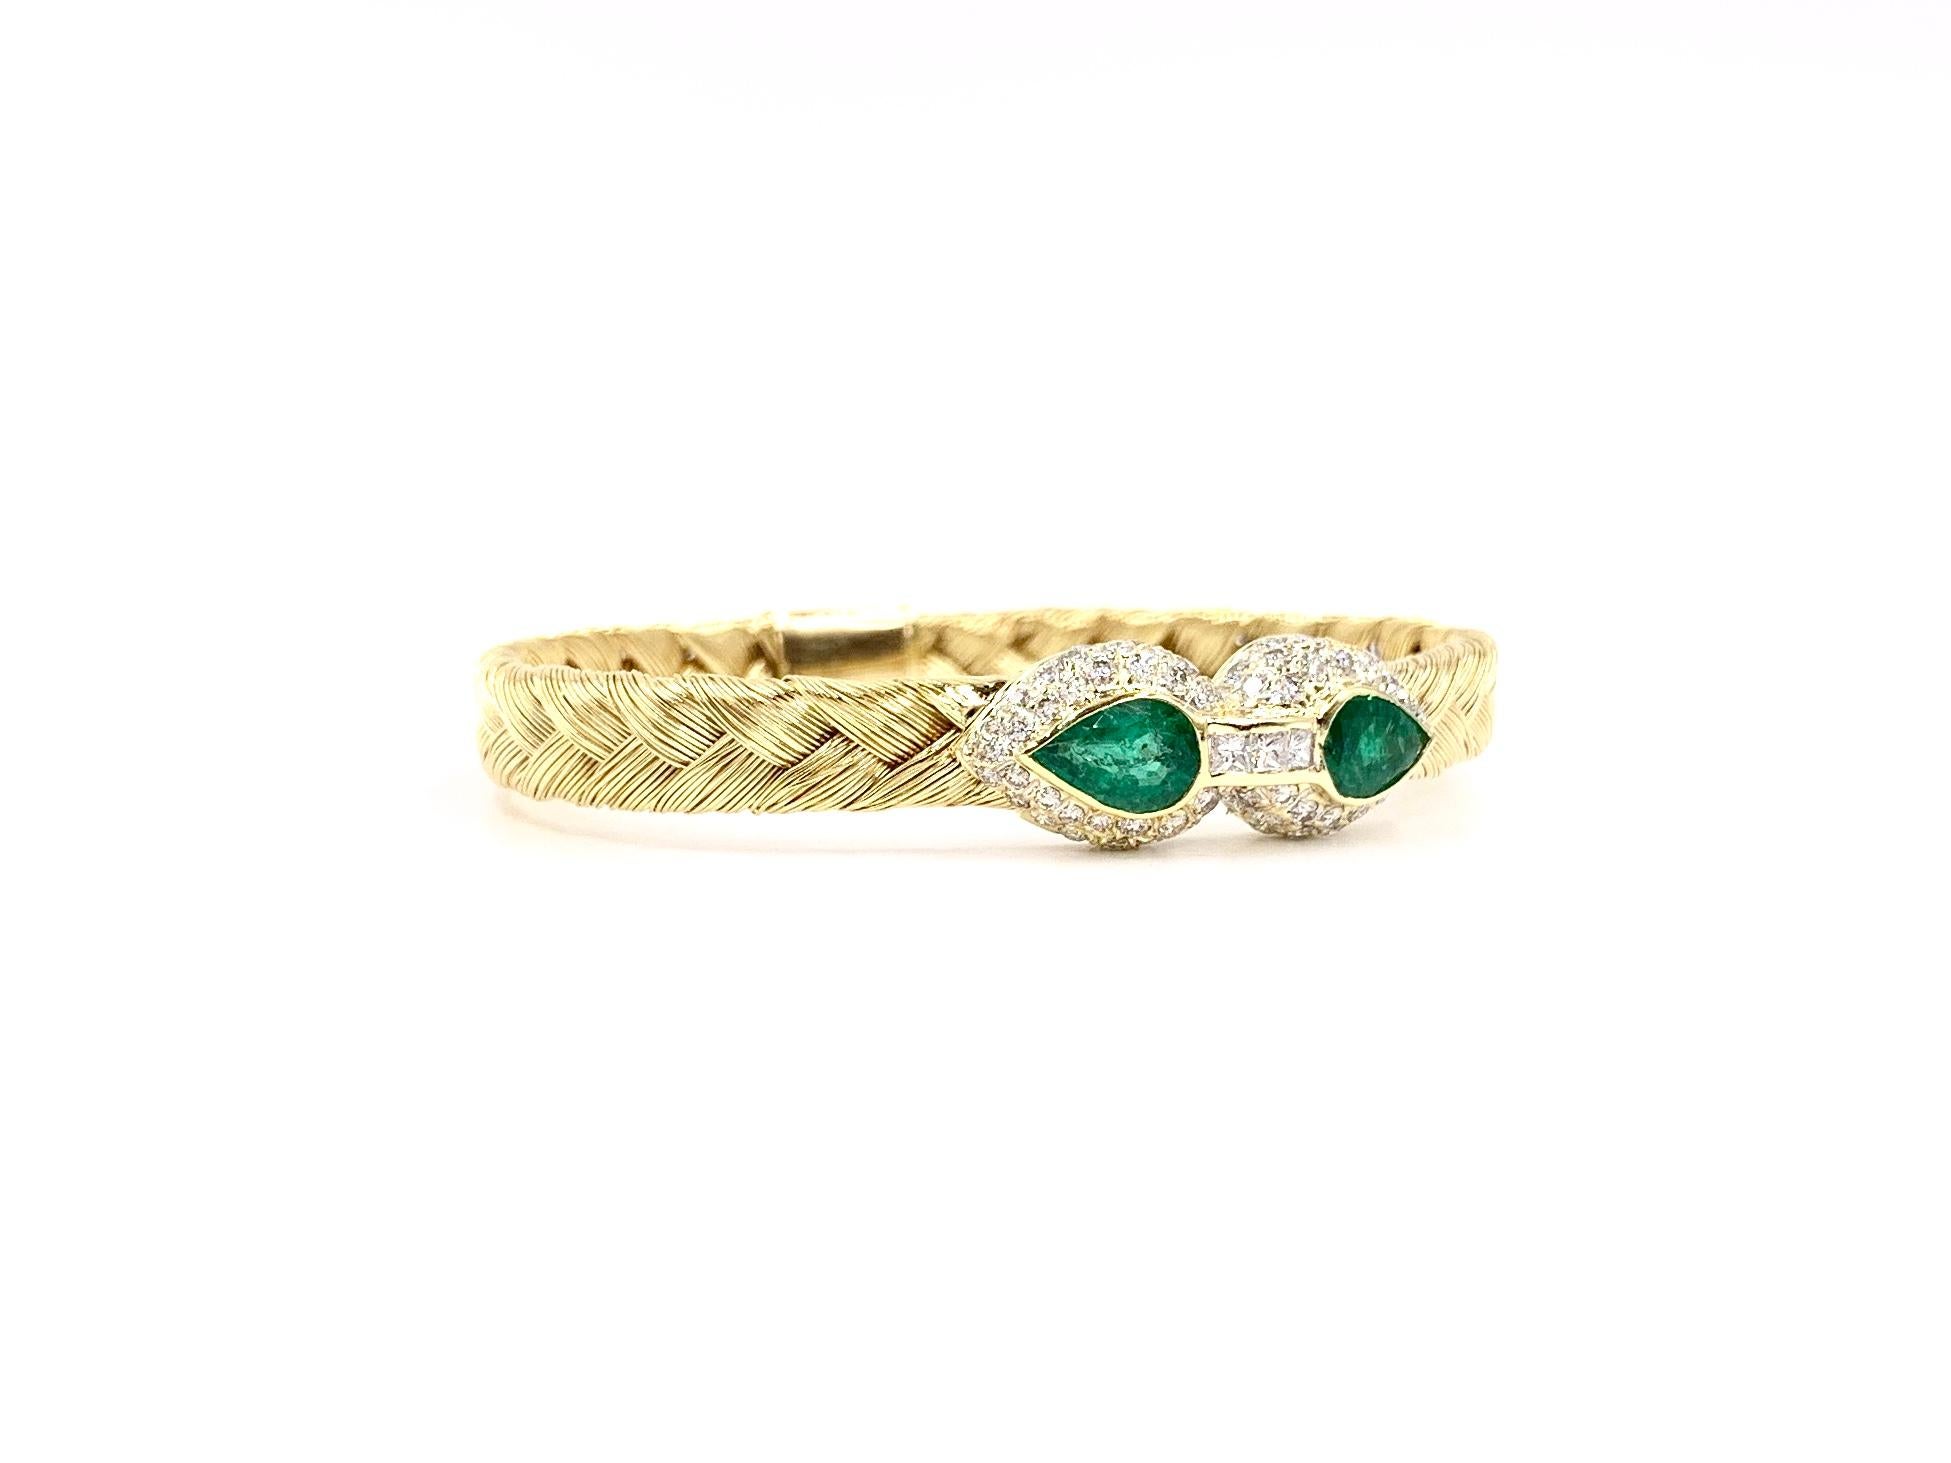 A comfortable, well made and simply beautiful 18 karat yellow gold bangle bracelet featuring two well saturated pear shaped emeralds at 1.68 carats total weight. Emeralds are surrounded by round brilliant diamonds and connected by three princess cut